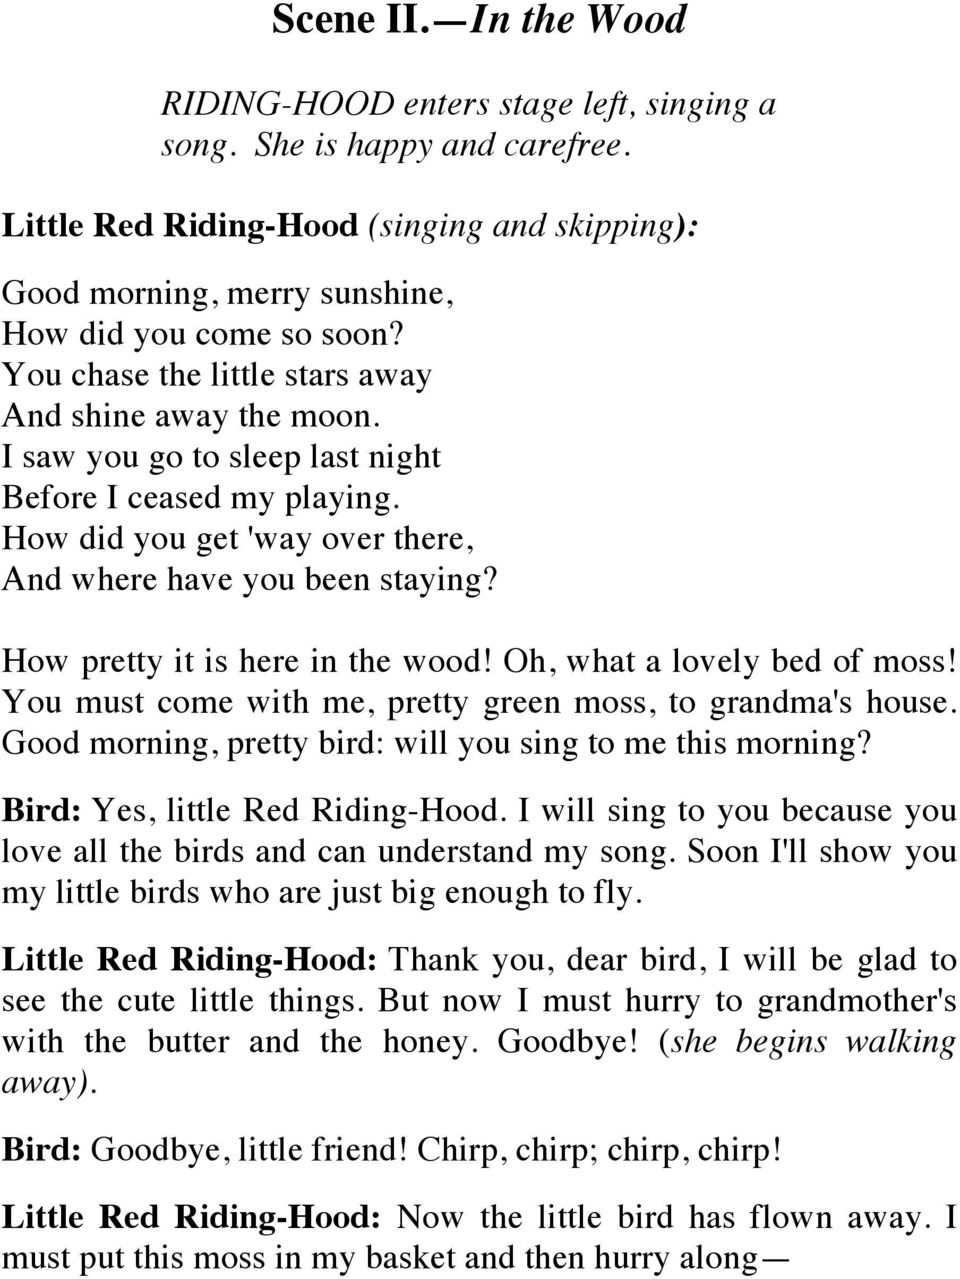 Little Red Riding Hood Pdf Free Download